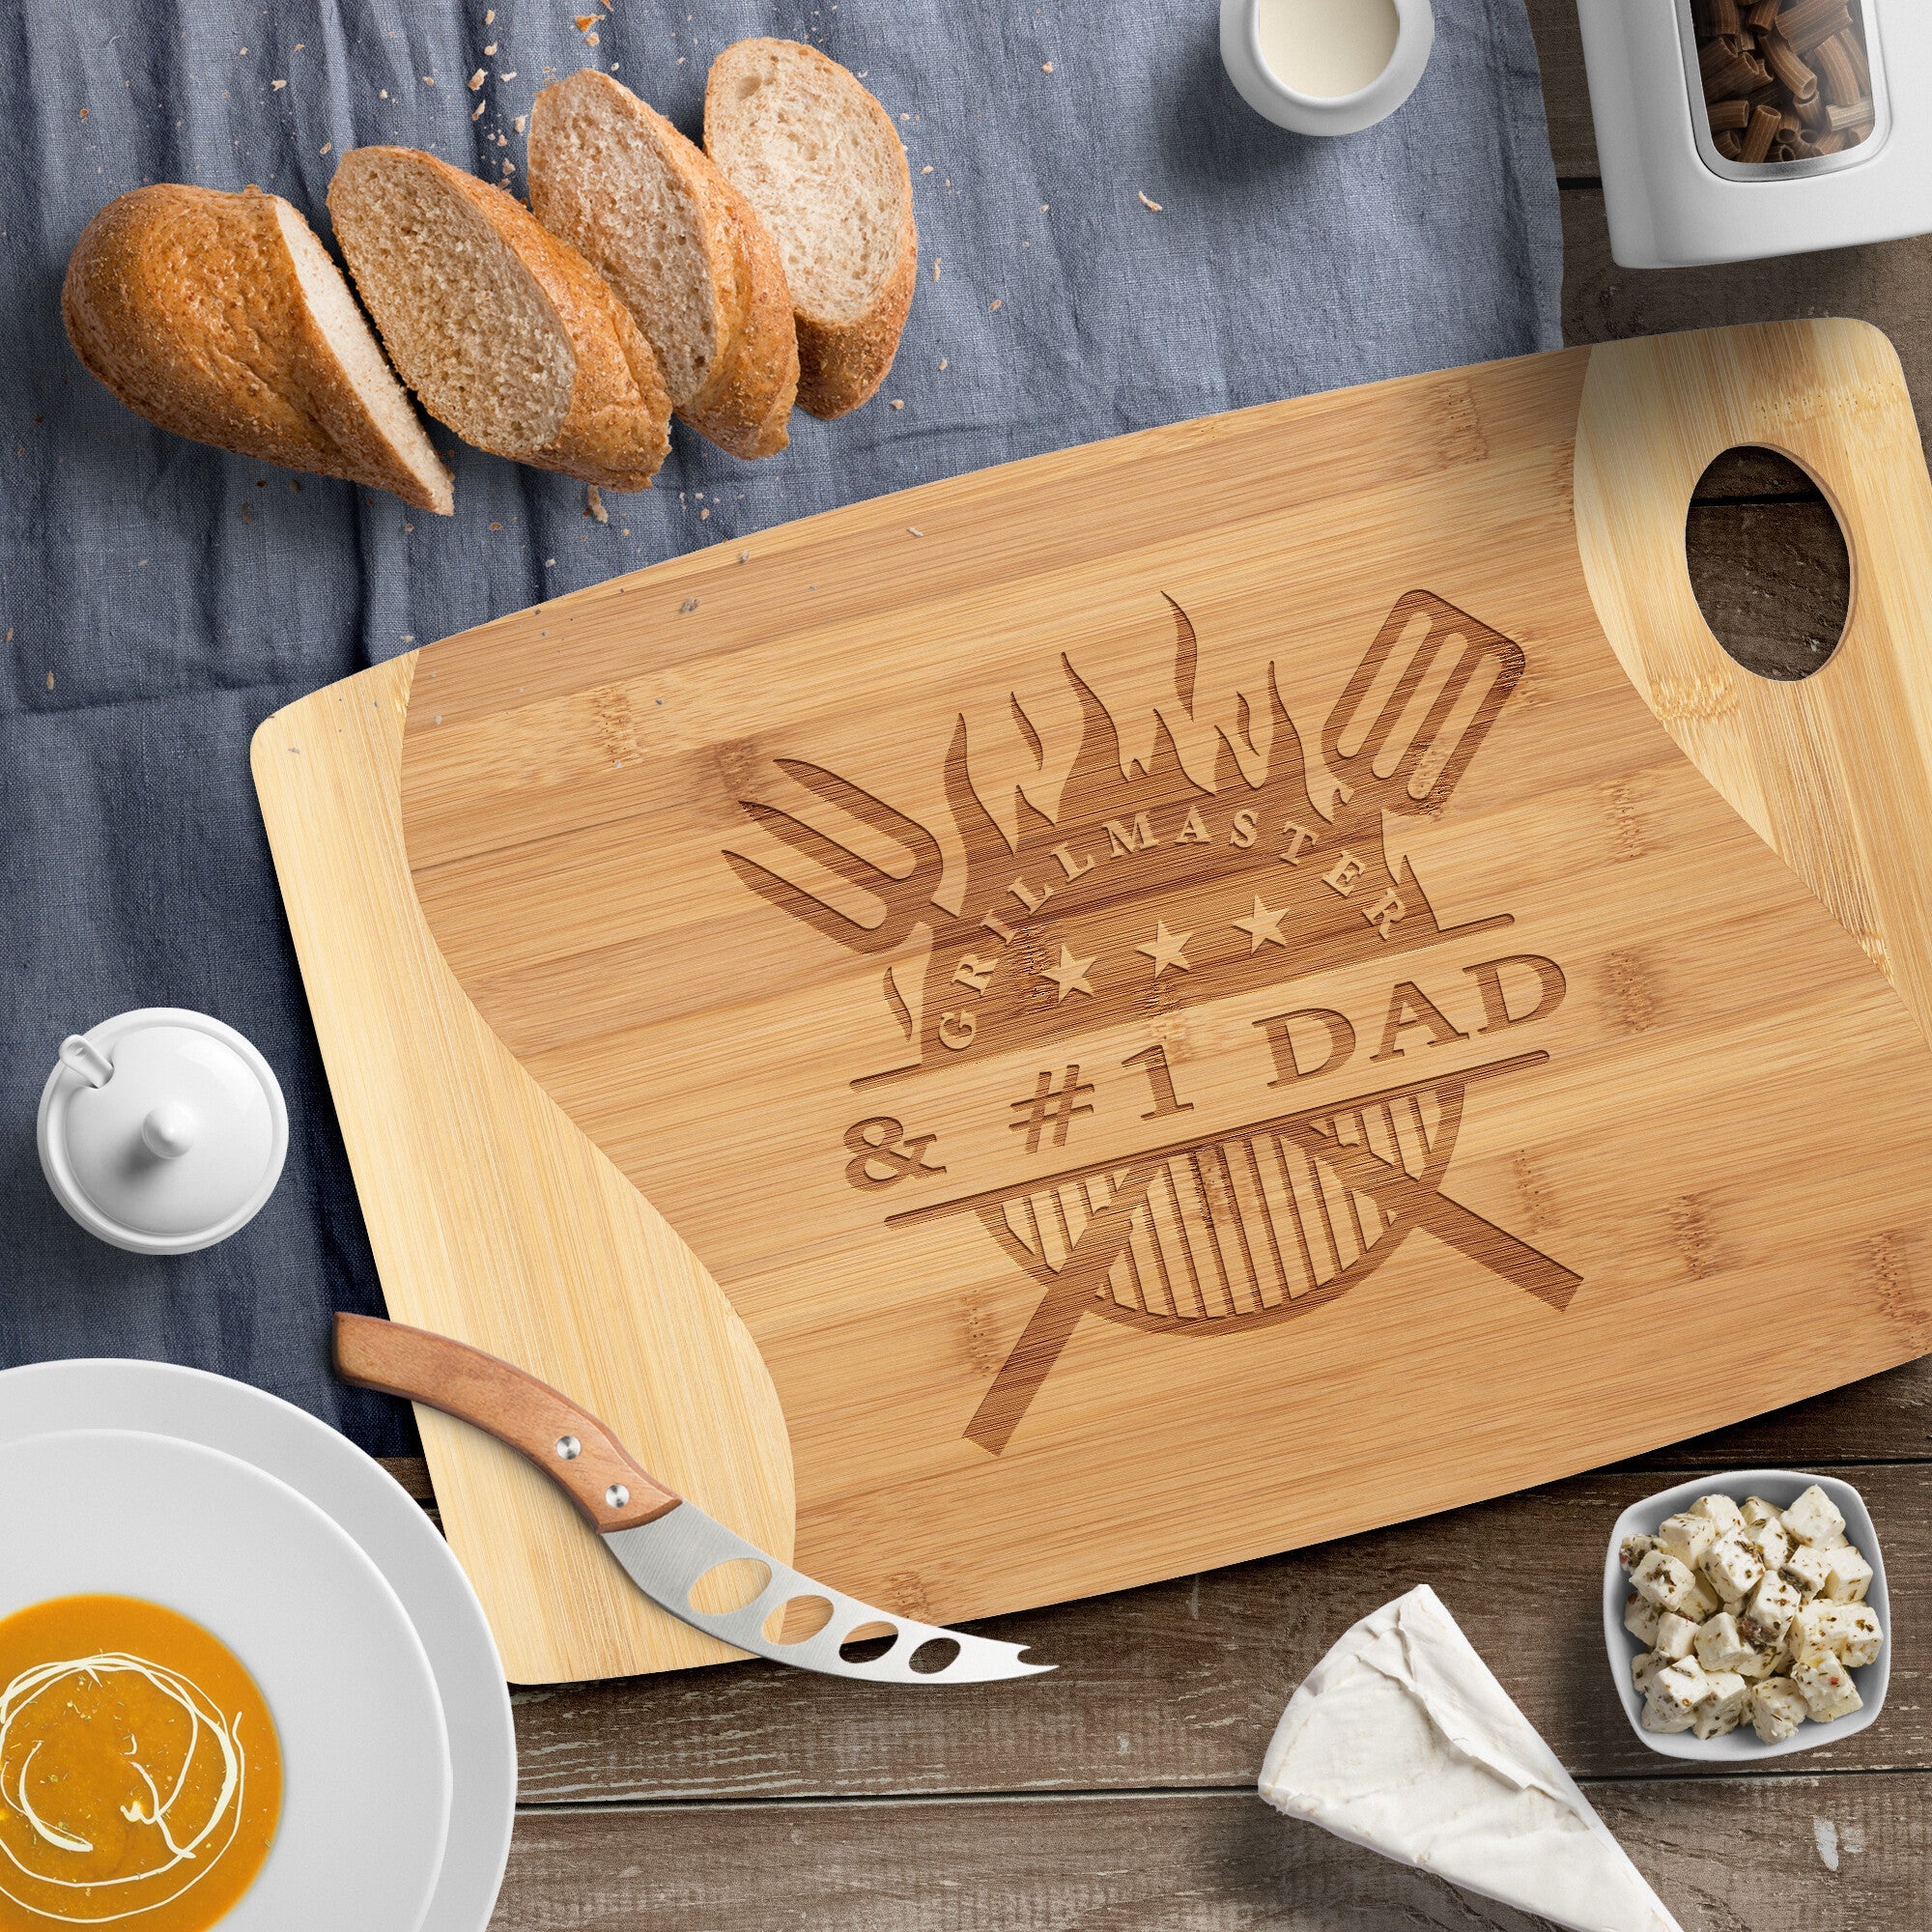 https://cdn.shopify.com/s/files/1/0267/0608/4013/products/grillmaster-personalized-bamboo-cutting-board-685534.jpg?v=1654836825&width=2000